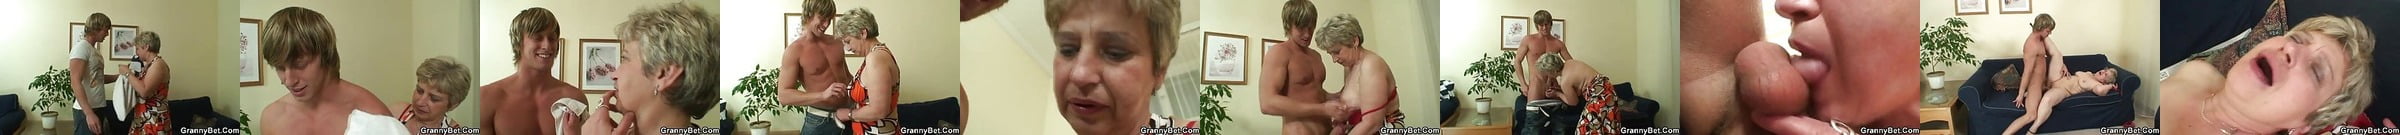 Lonely Granny Gives Her Pussy Free Free View Granny Porn Video Xhamster